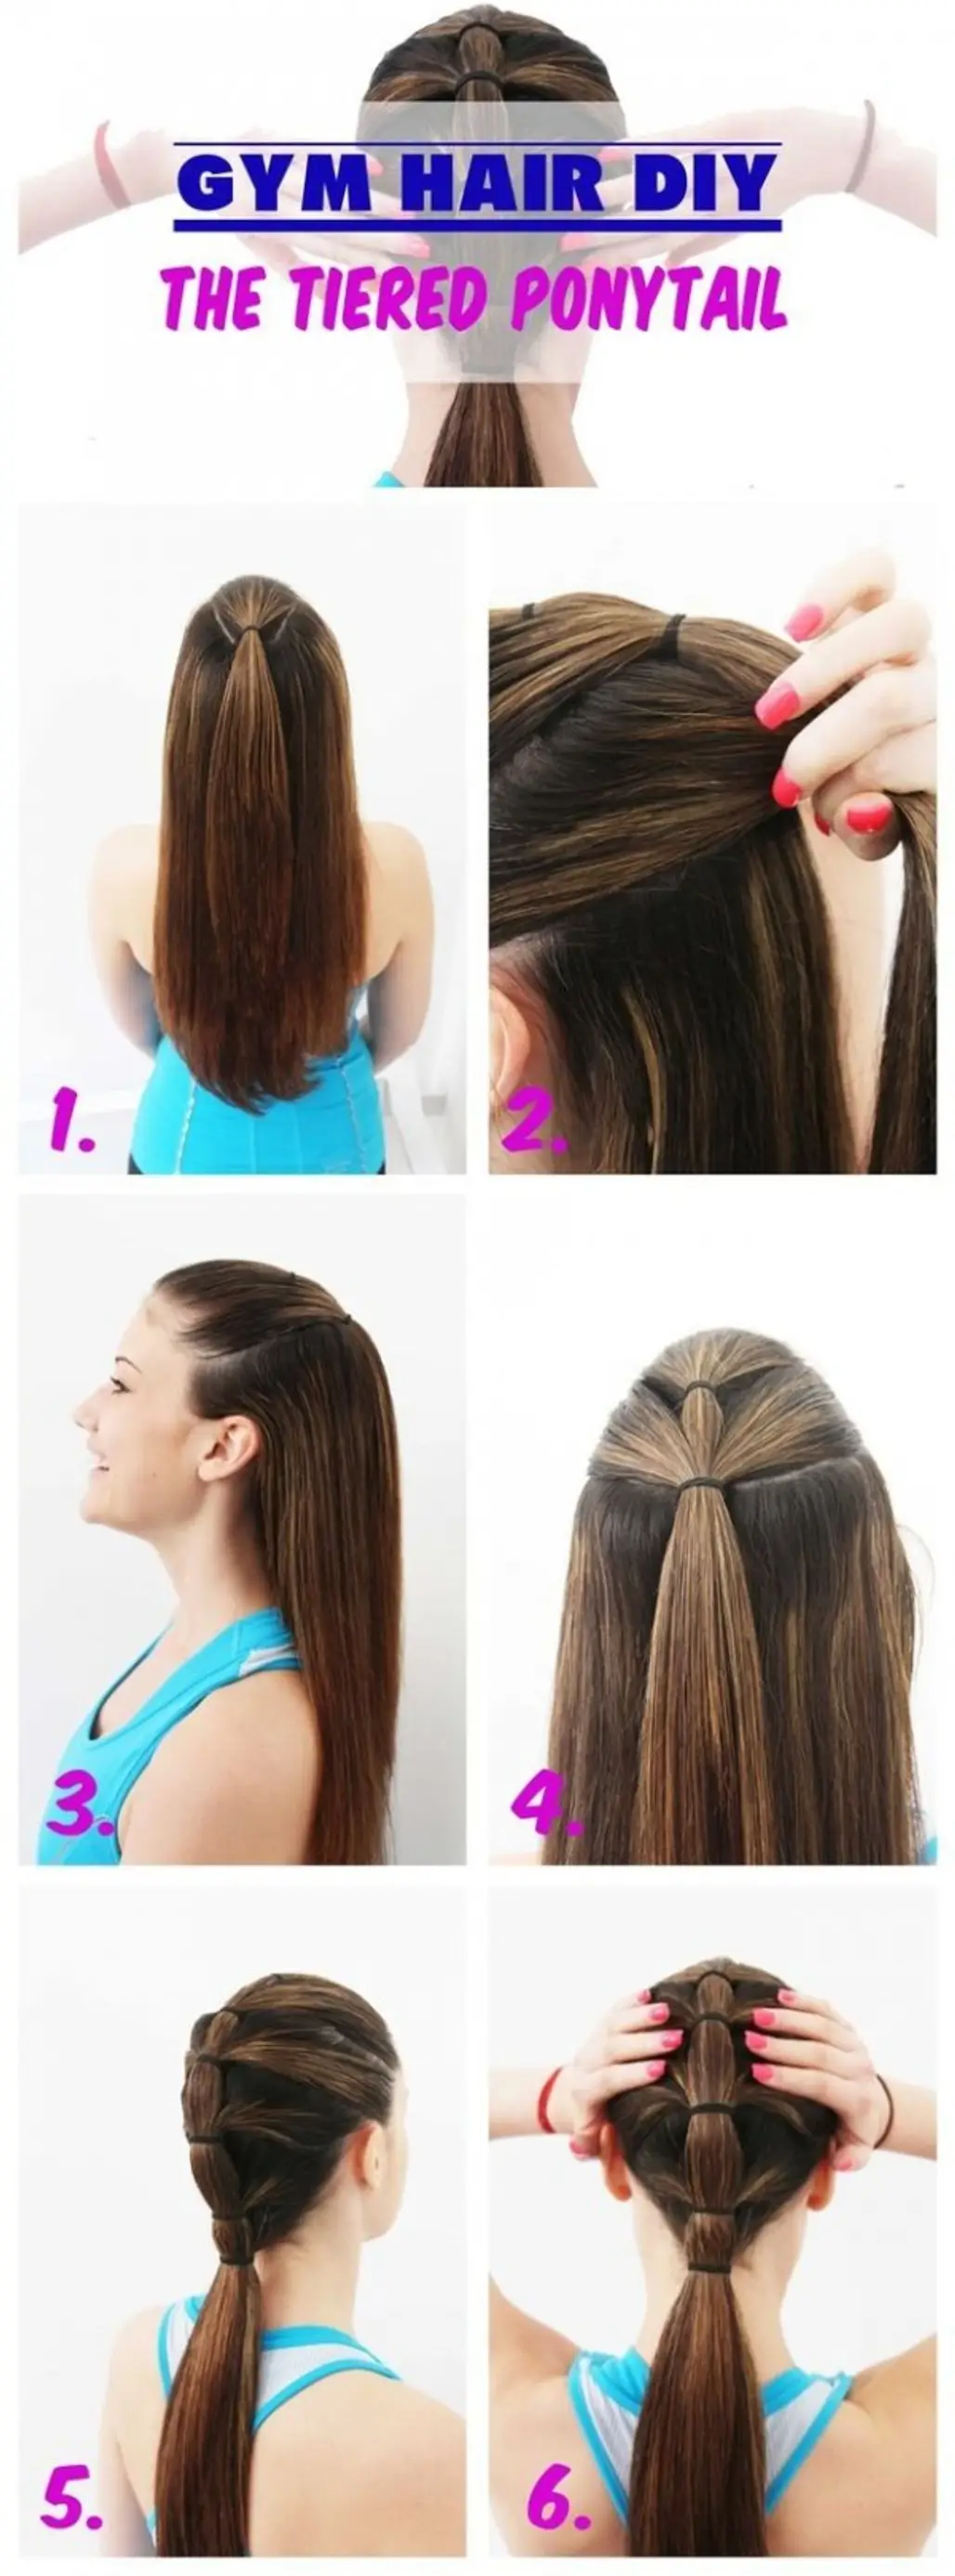 The Perfect Gym Hairstyle